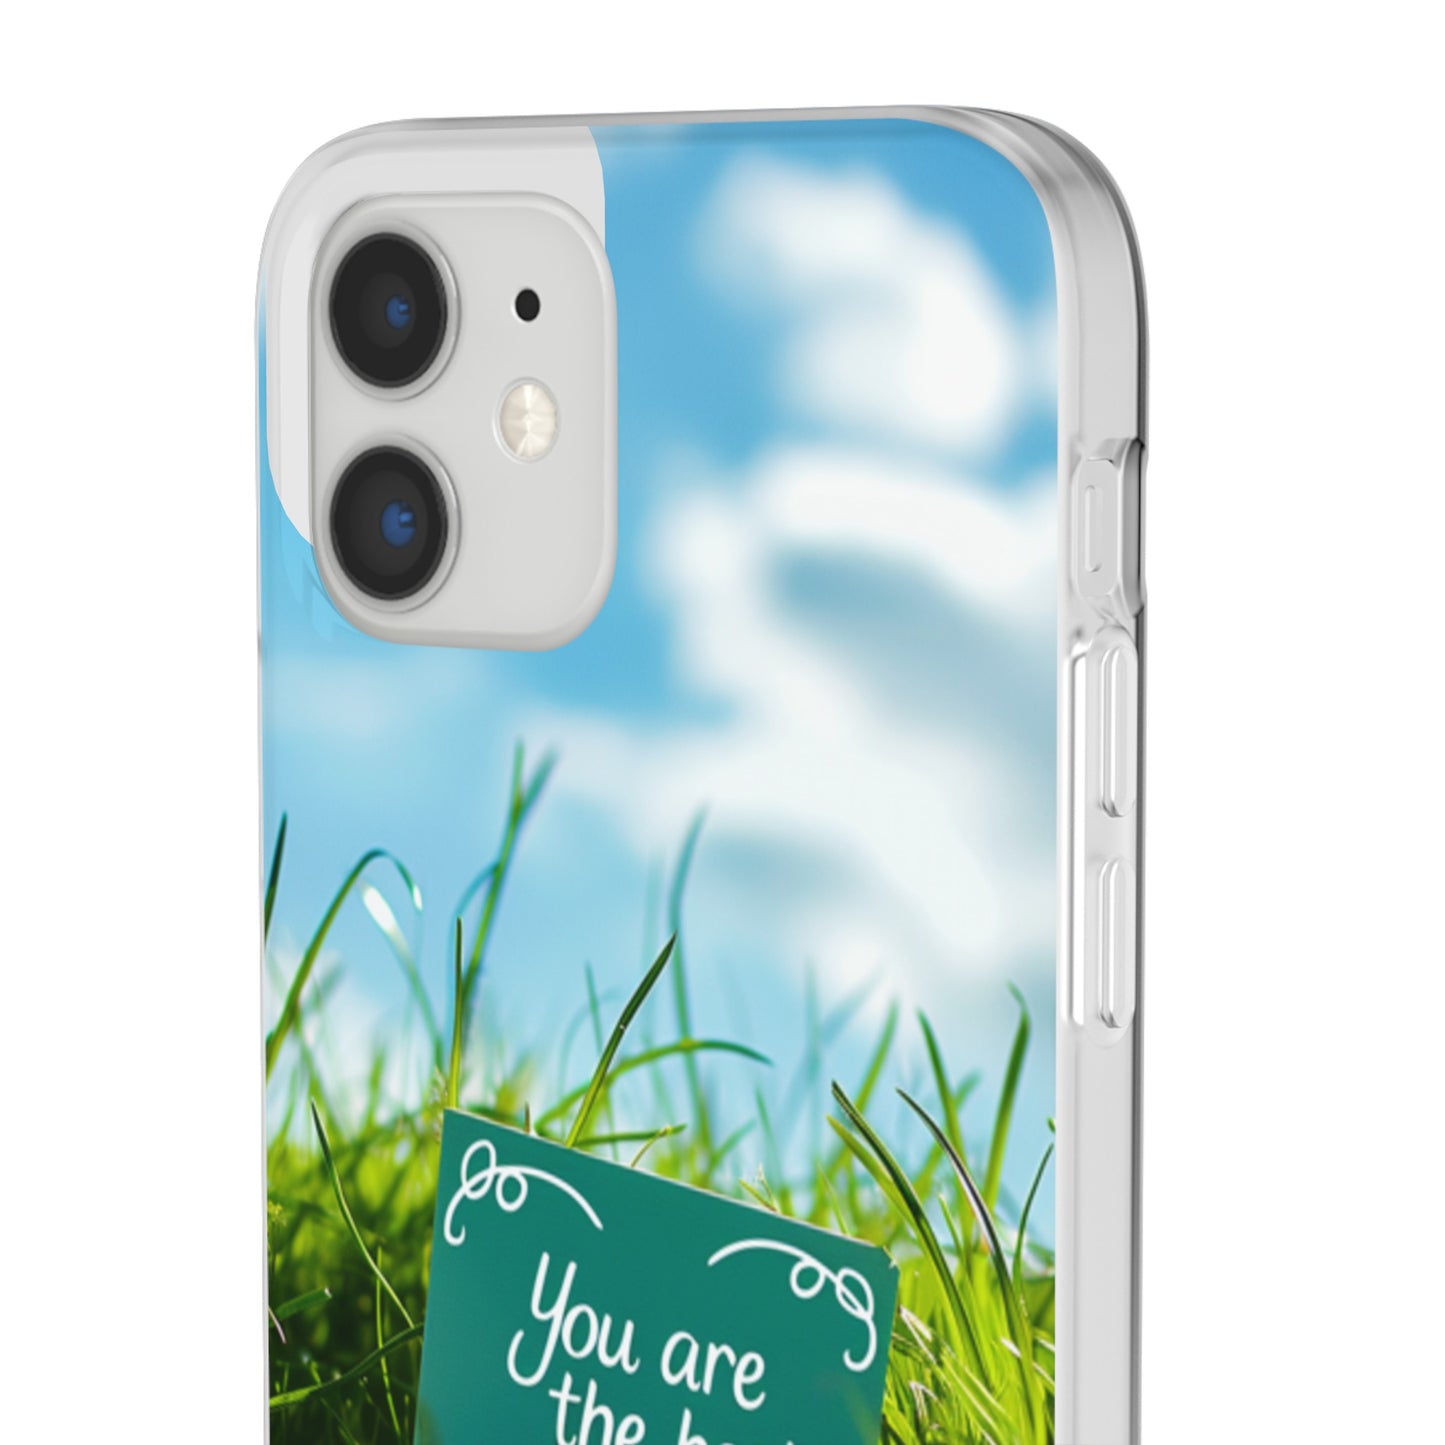 Flexi Cases - You are the best 2